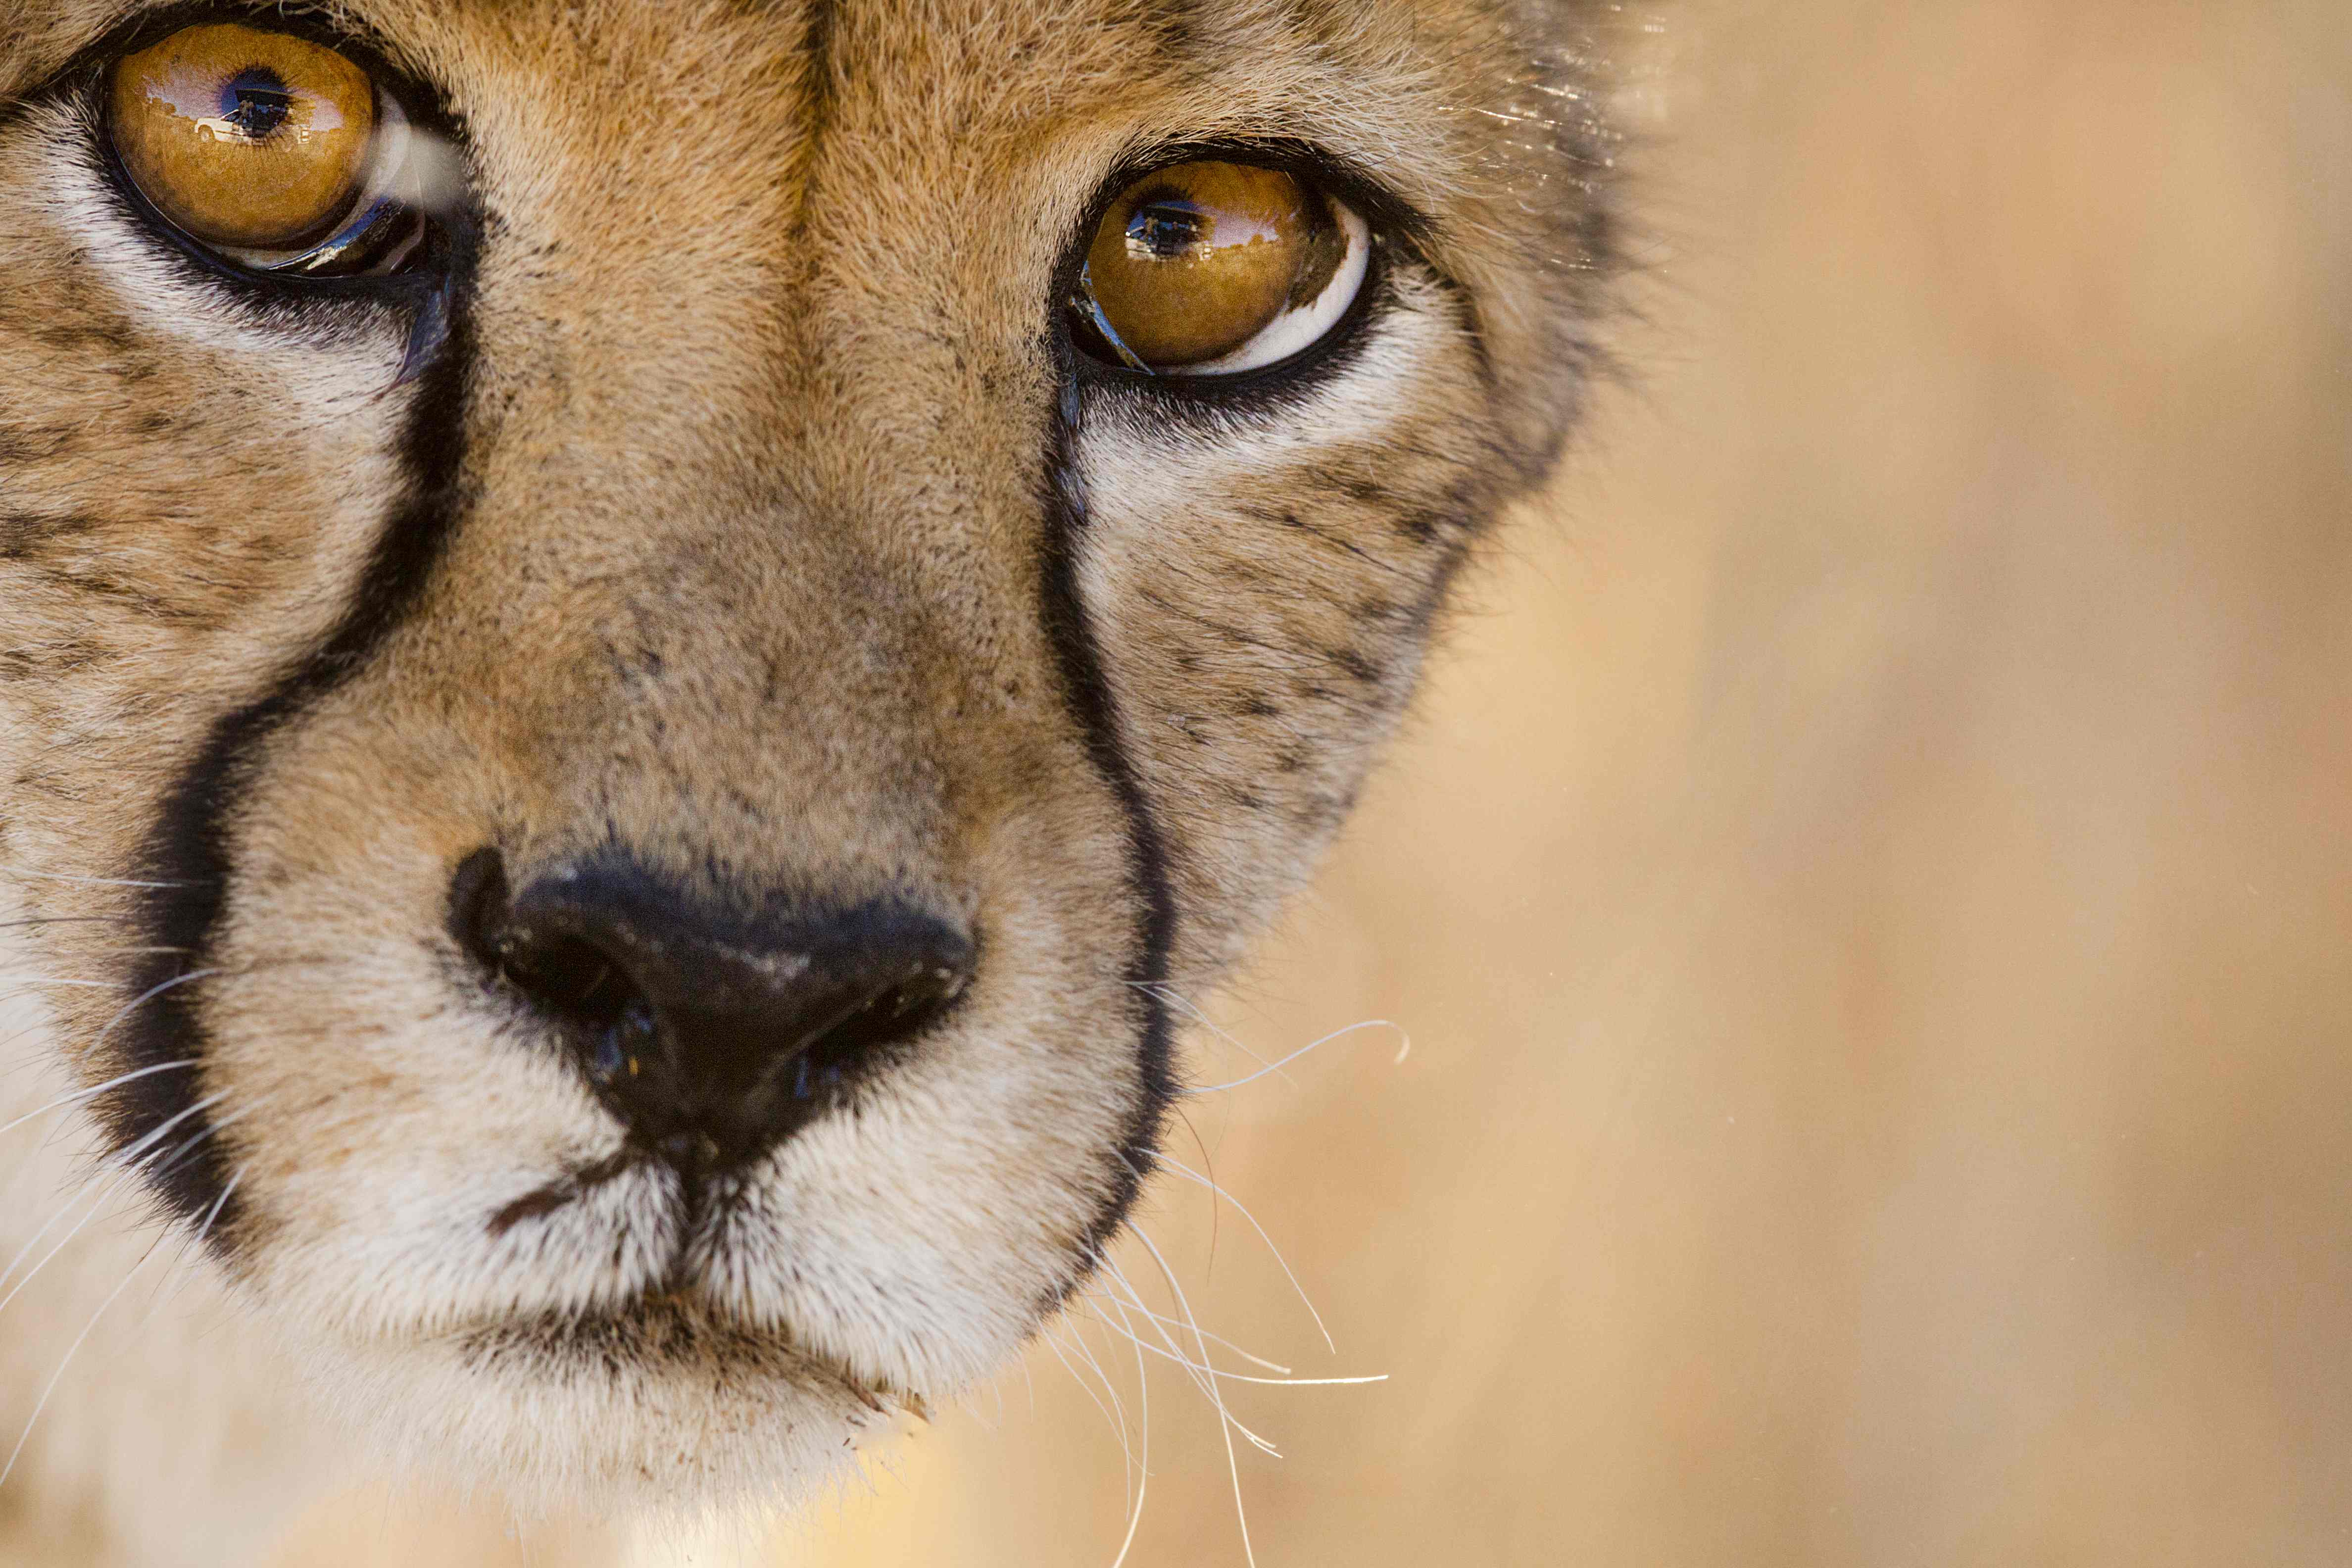 Only 10,000 cheetahs remain in the wild